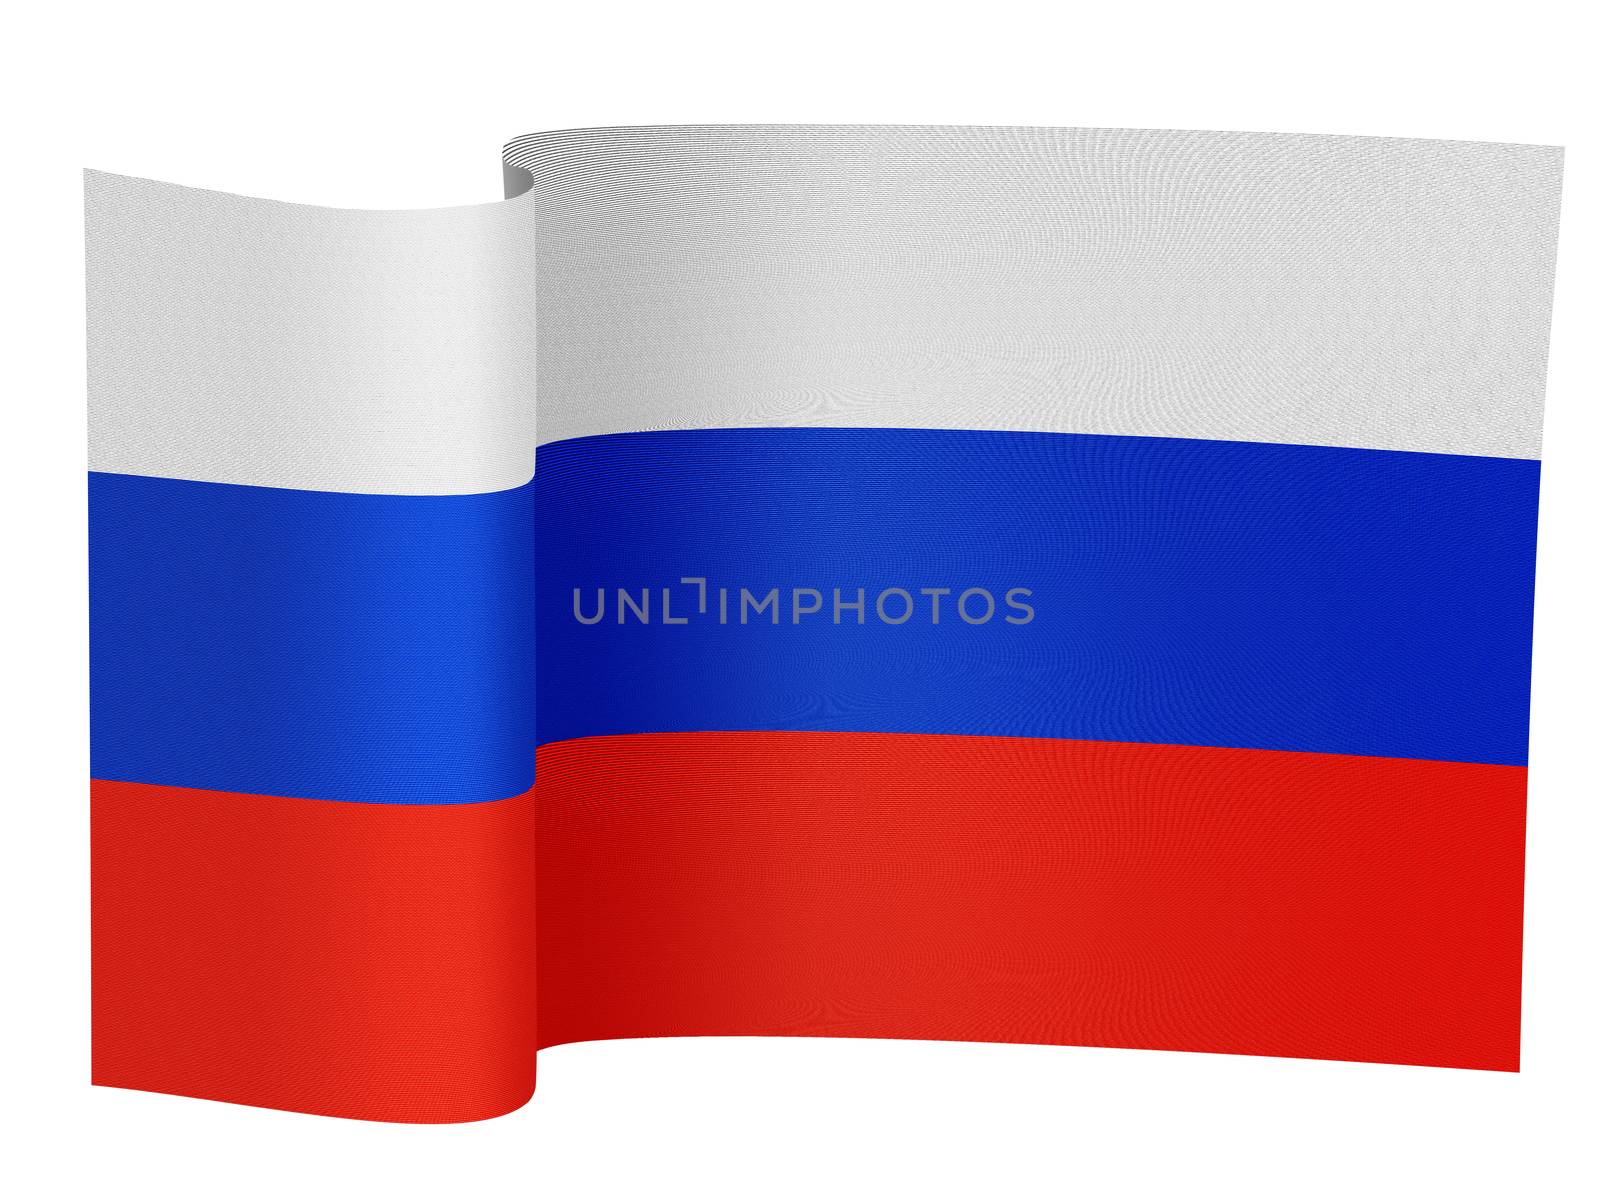 illustration of the Russian flag on a white background